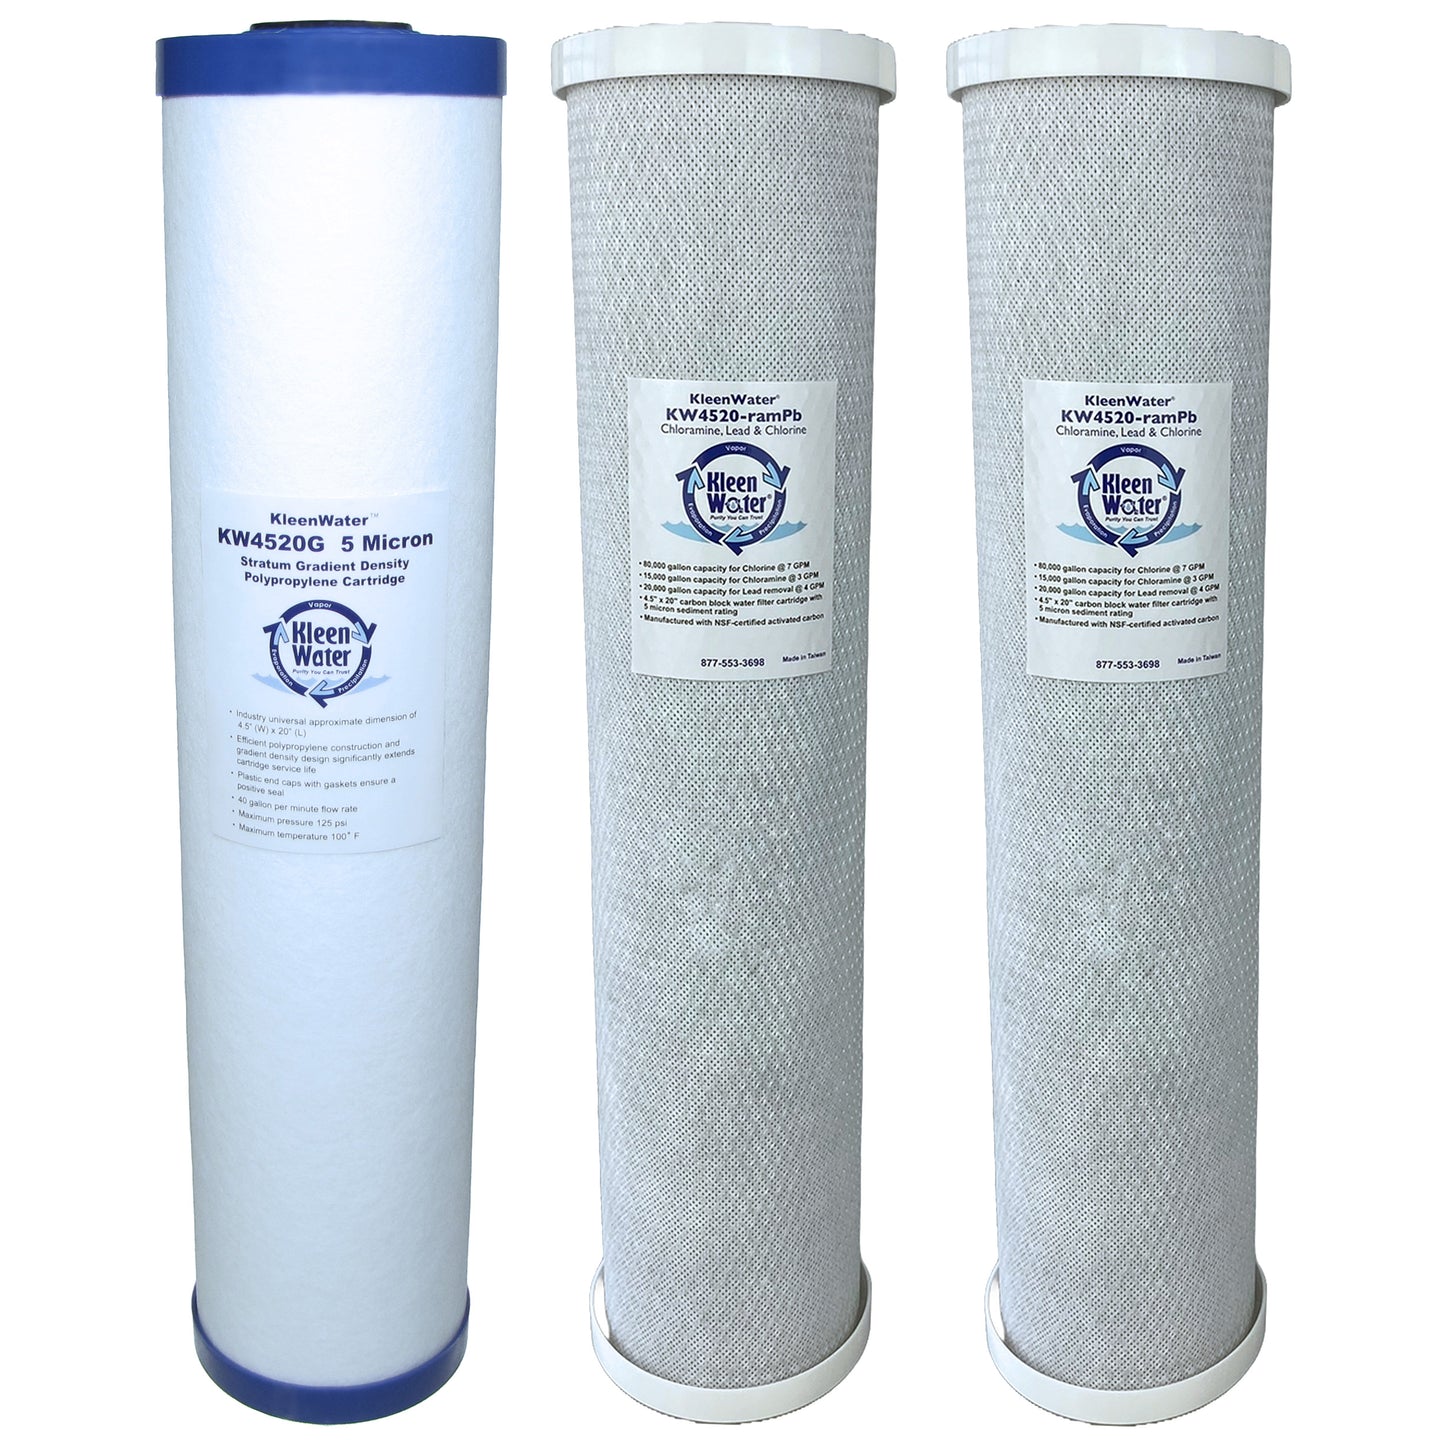 KleenWater 3-Piece Replacement Filter Cartridge Set for KW-TRIO-ramPb(2)-4520G(1) Chloramine and Lead Filtration System